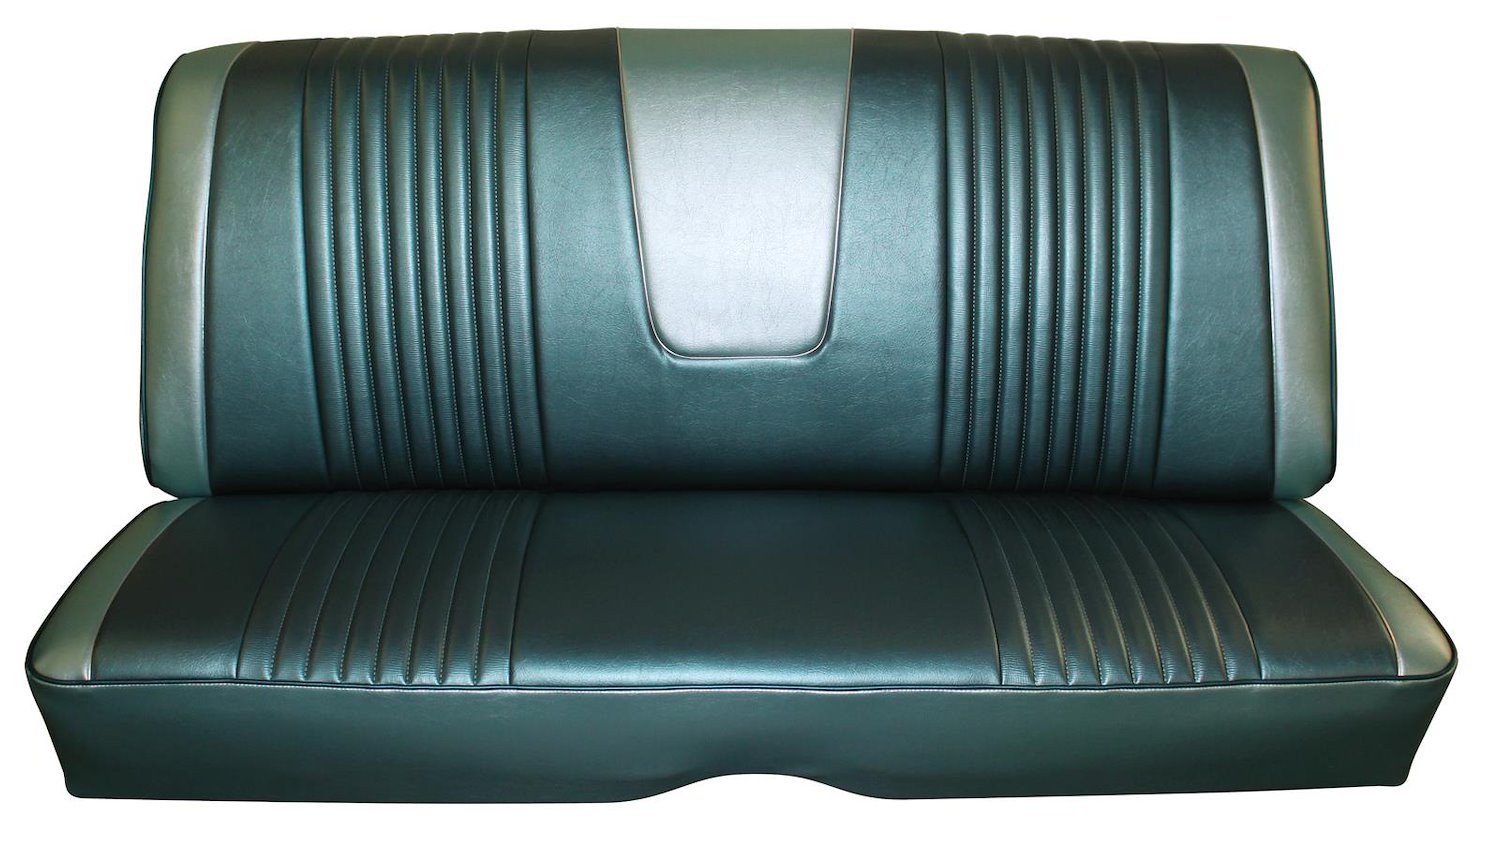 1963 Ford Galaxie 500 Fastback Interior Rear Bench Seat.